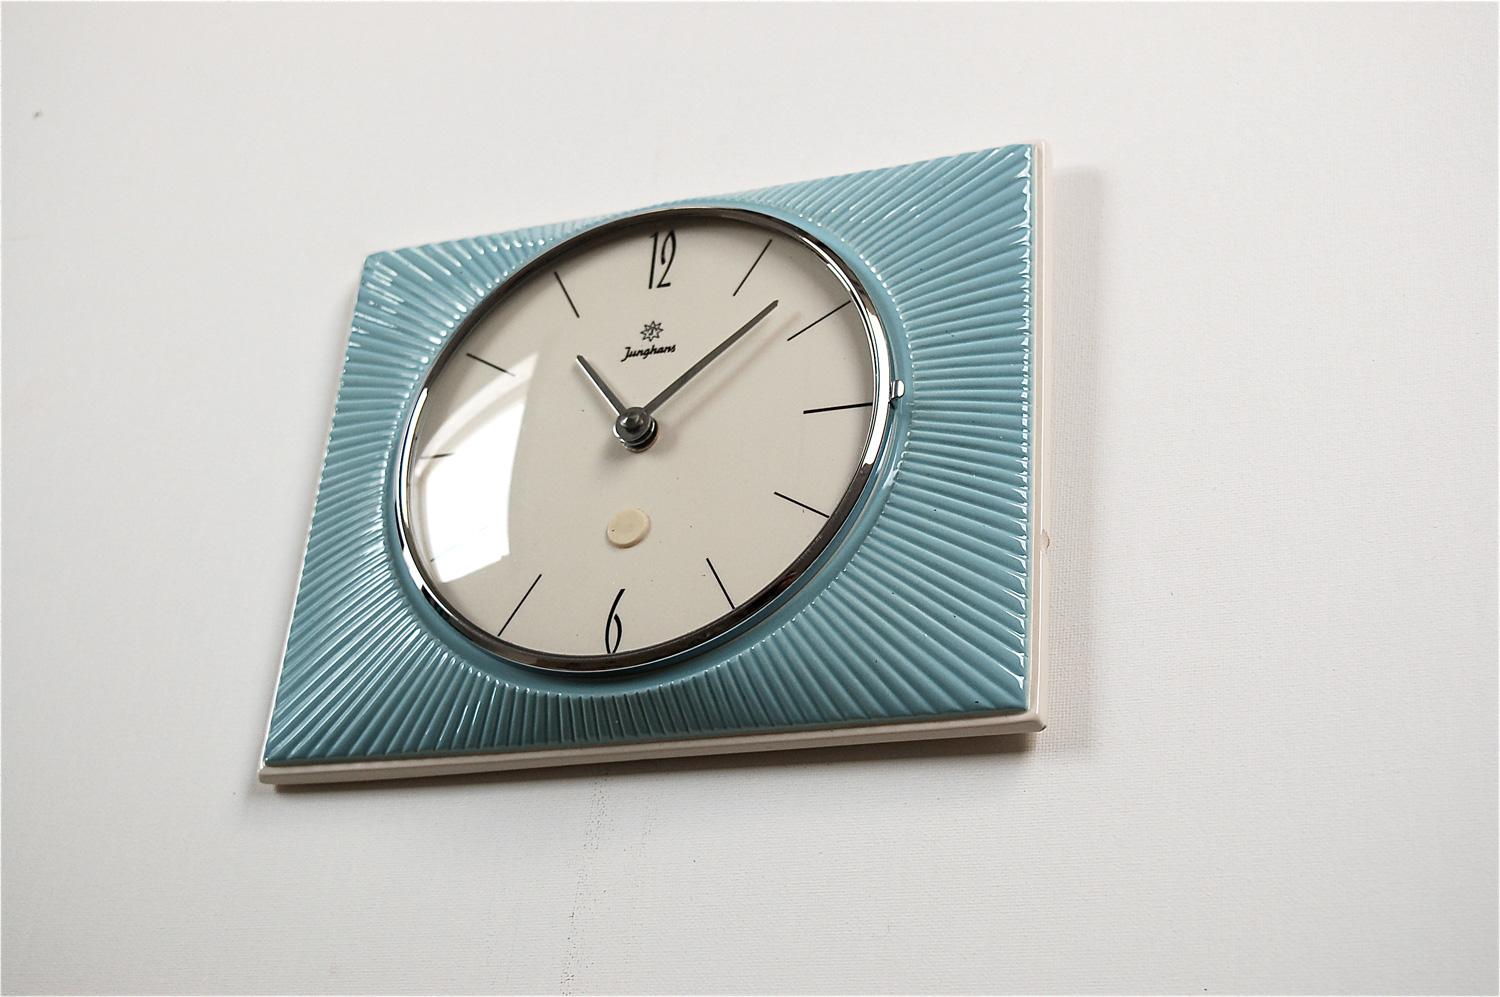 1960s, vintage ceramic wall clock by German manufacturer Junghans. The ceramic base is cream colored with a baby blue glazed front decorated in a raised sunburst pattern with the clock at the centre. It has a hinged glass front with a thin chrome